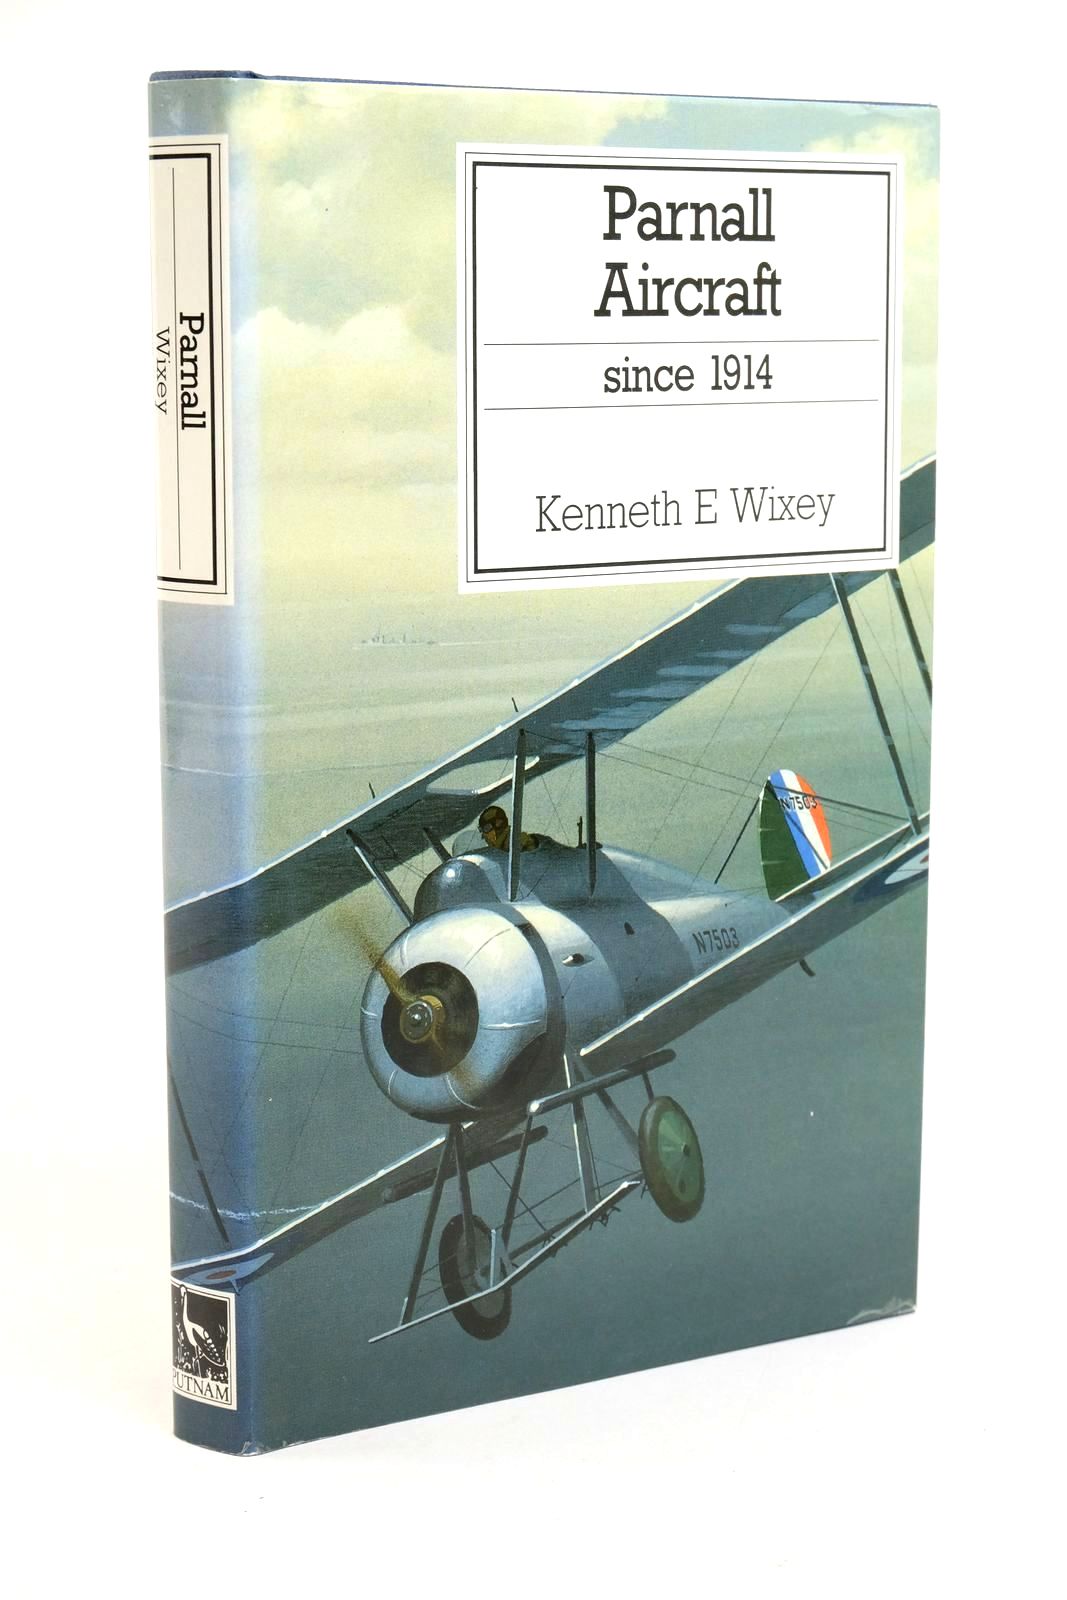 Photo of PARNALL AIRCRAFT SINCE 1914 written by Wixey, Kenneth E. published by Putnam (STOCK CODE: 1321914)  for sale by Stella & Rose's Books